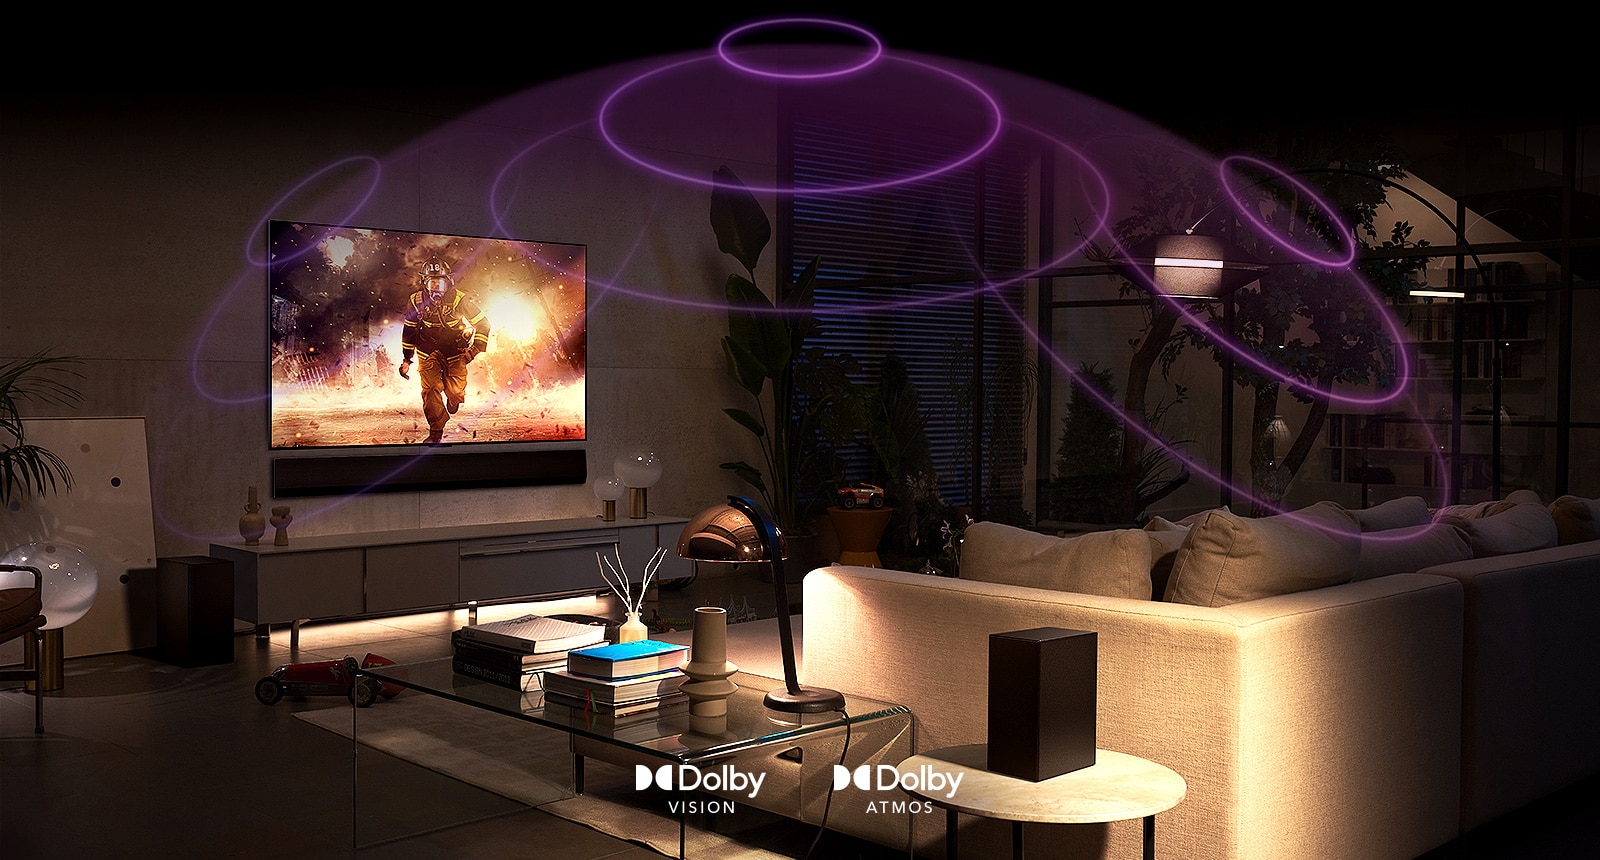 Photo of LG OLED TV in a room showing an action movie.  Sound waves create a kiss-like shape between the sofa and the TV for immersive spatial sound perception.